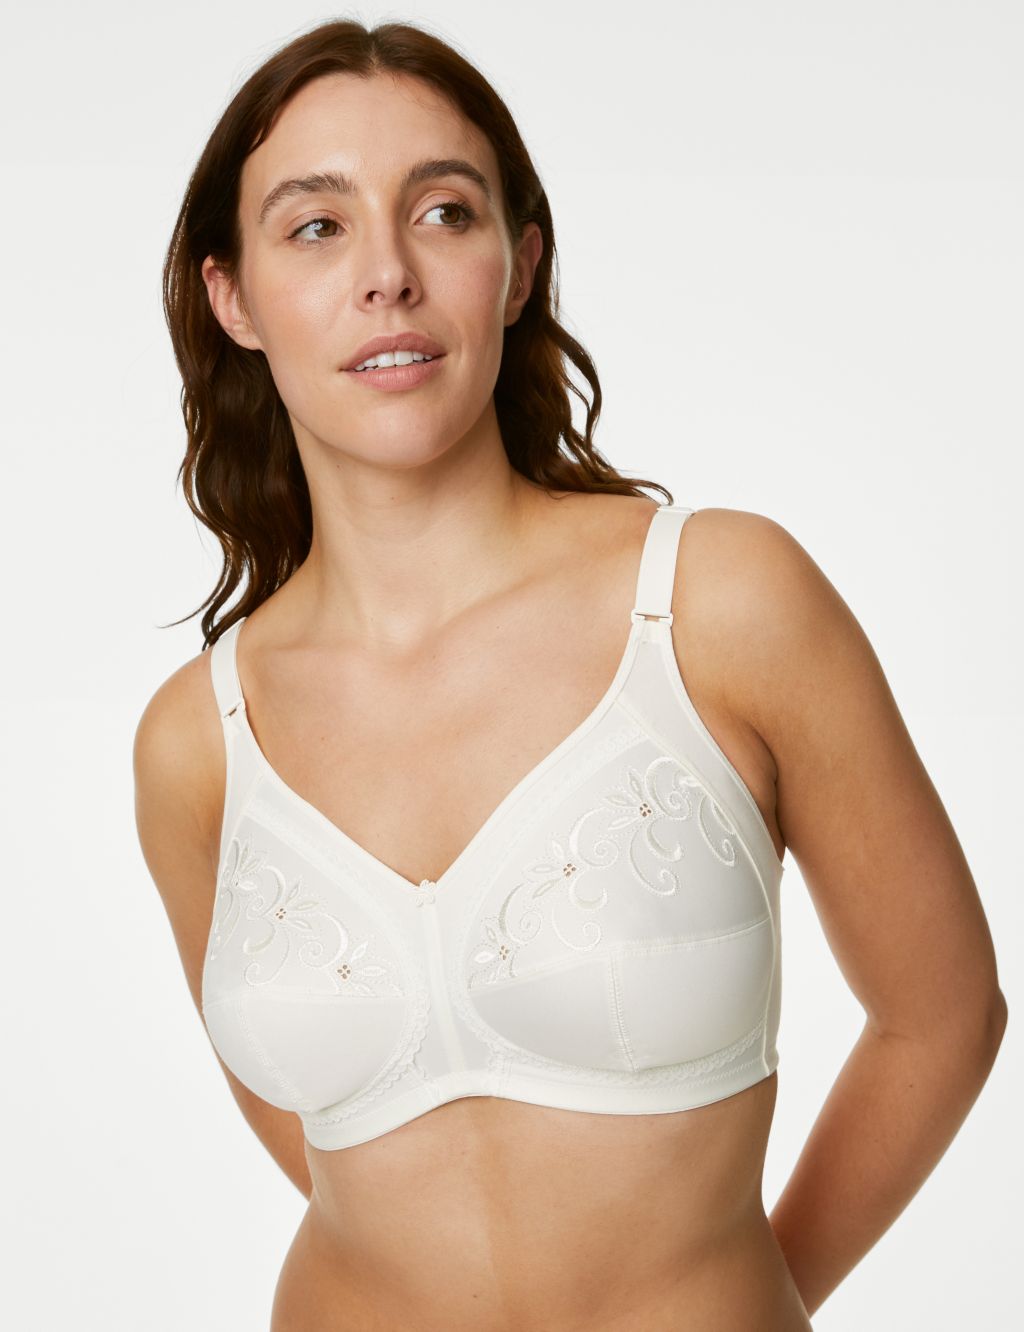 M&S Cool Comfort breathable all day, non wired, full cup bra 42D